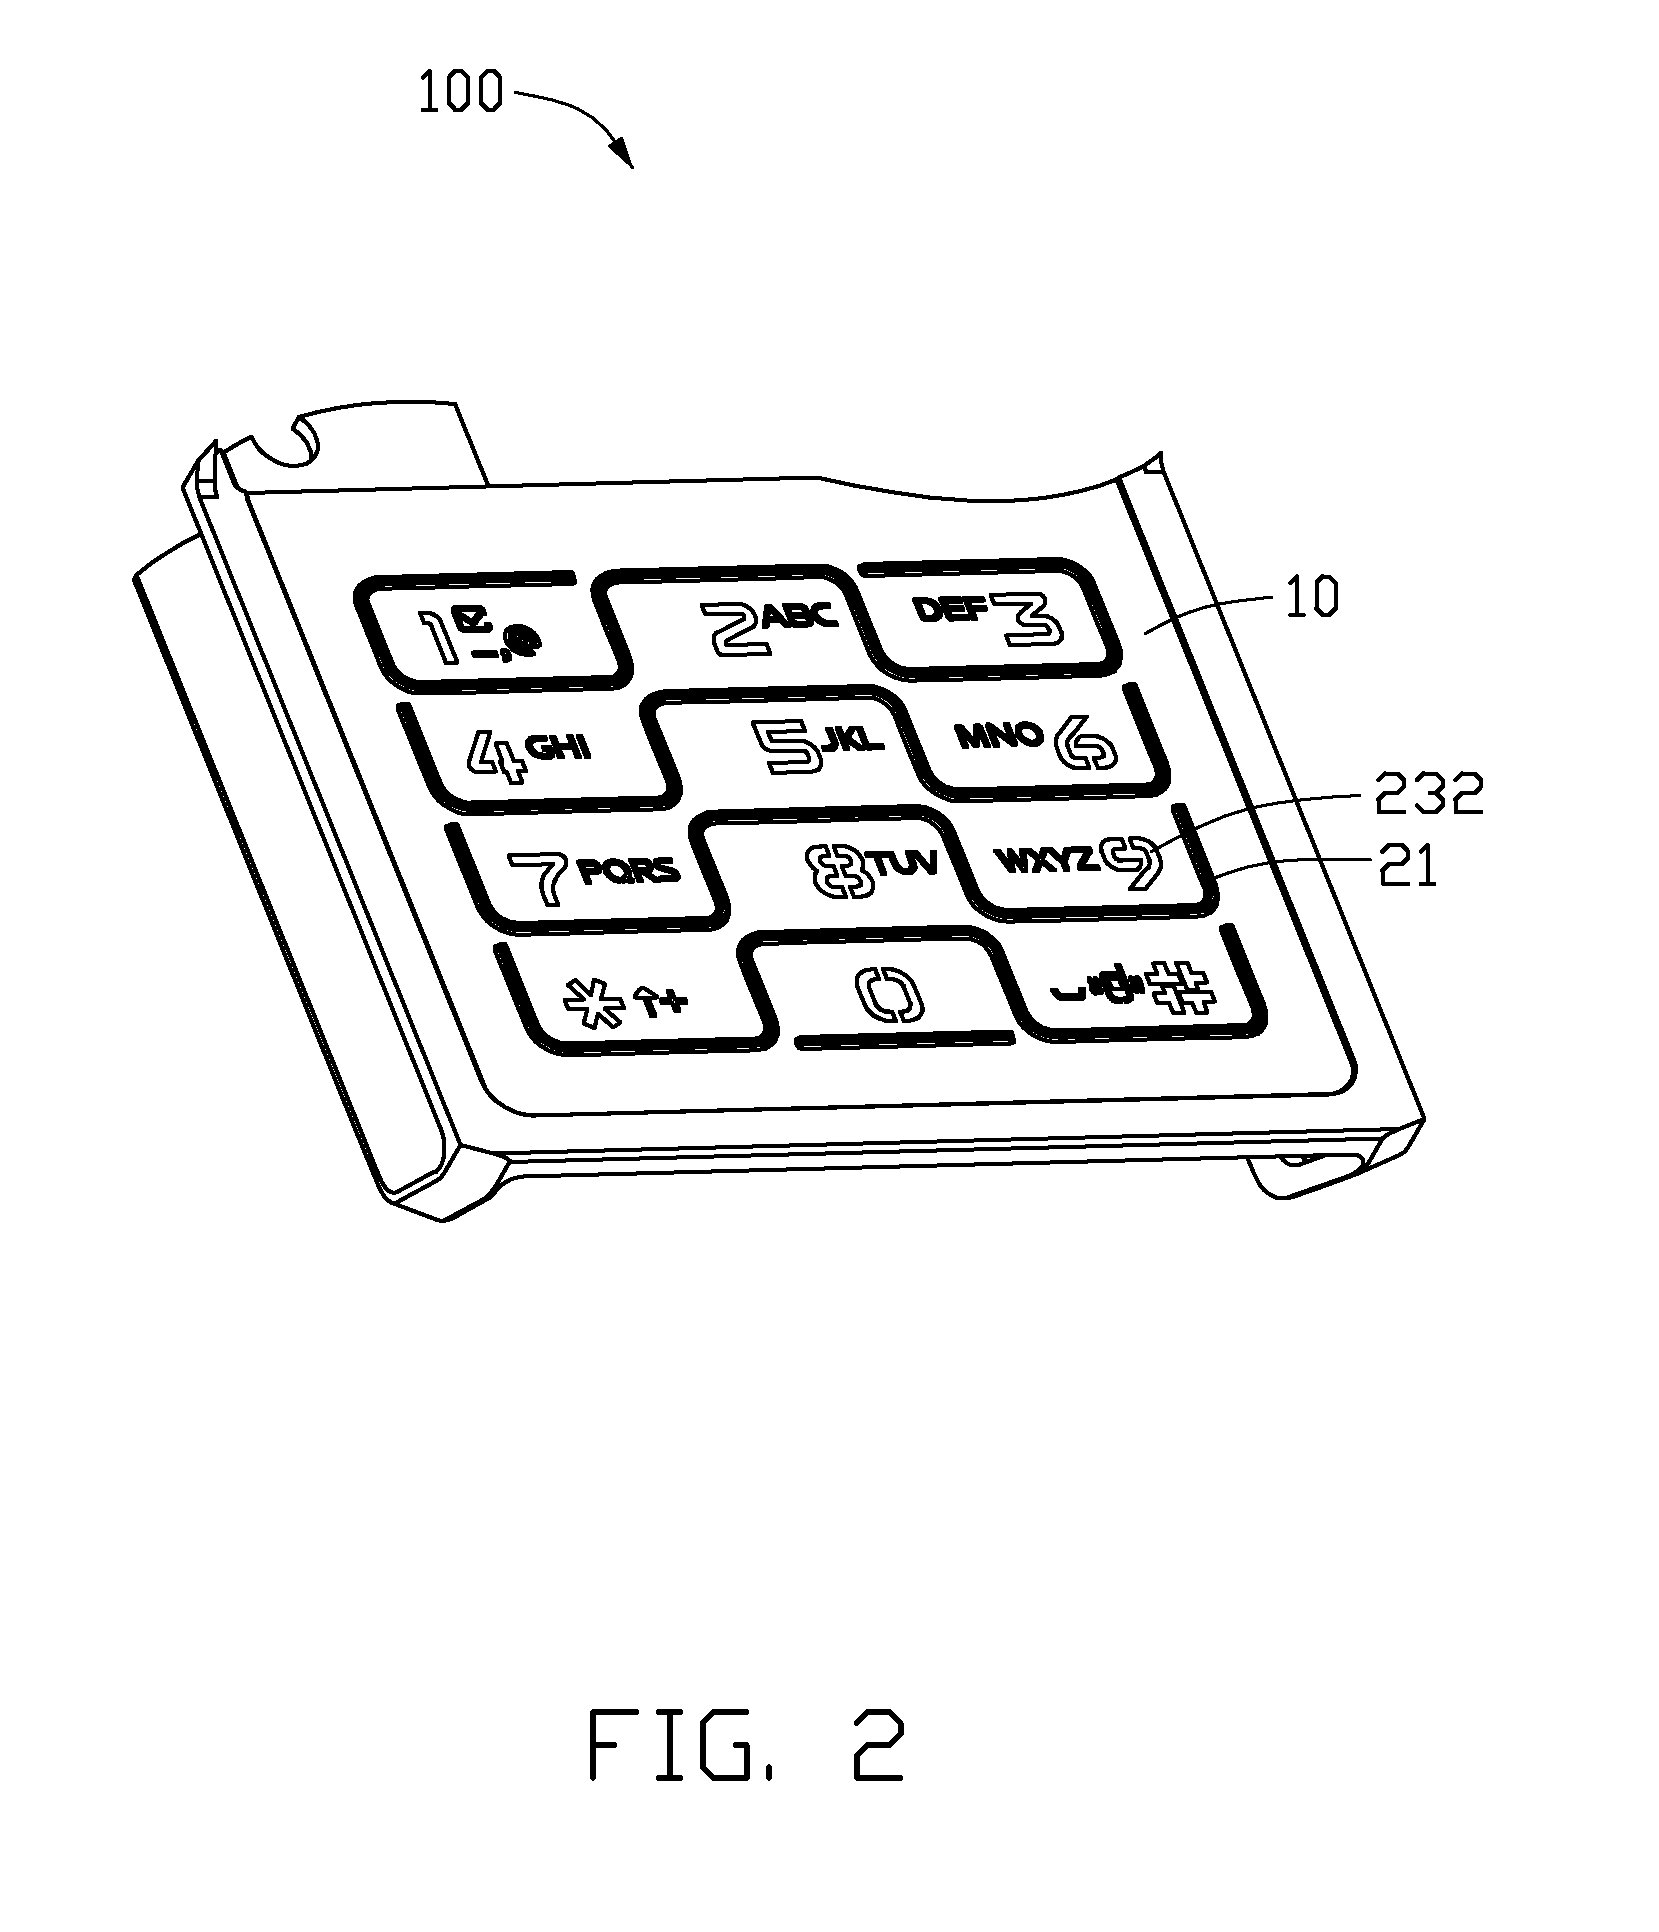 Keypad assembly and mathod for making the same